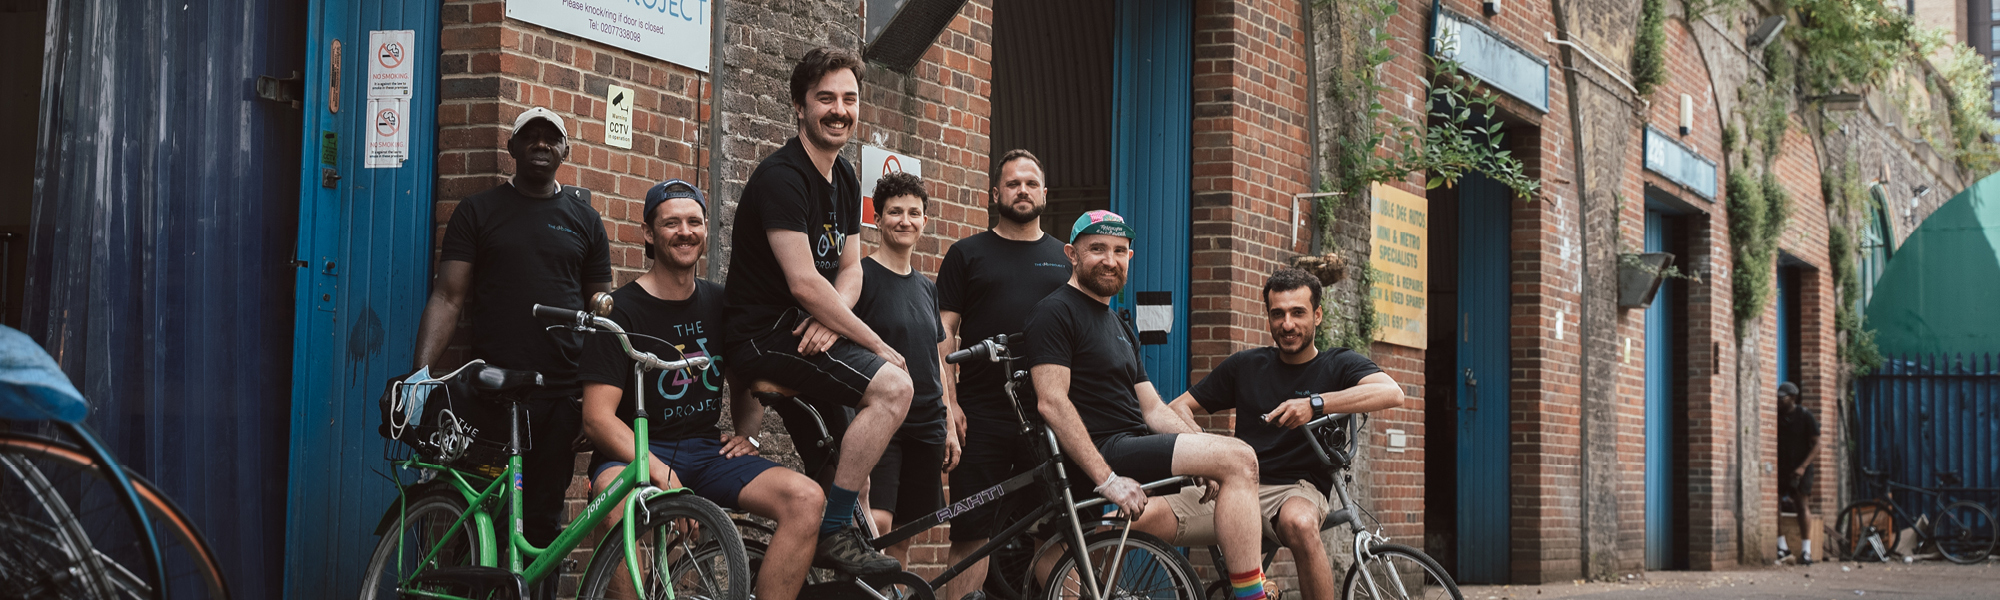 SunGod x The Bike Project: Get Refugees Cycling